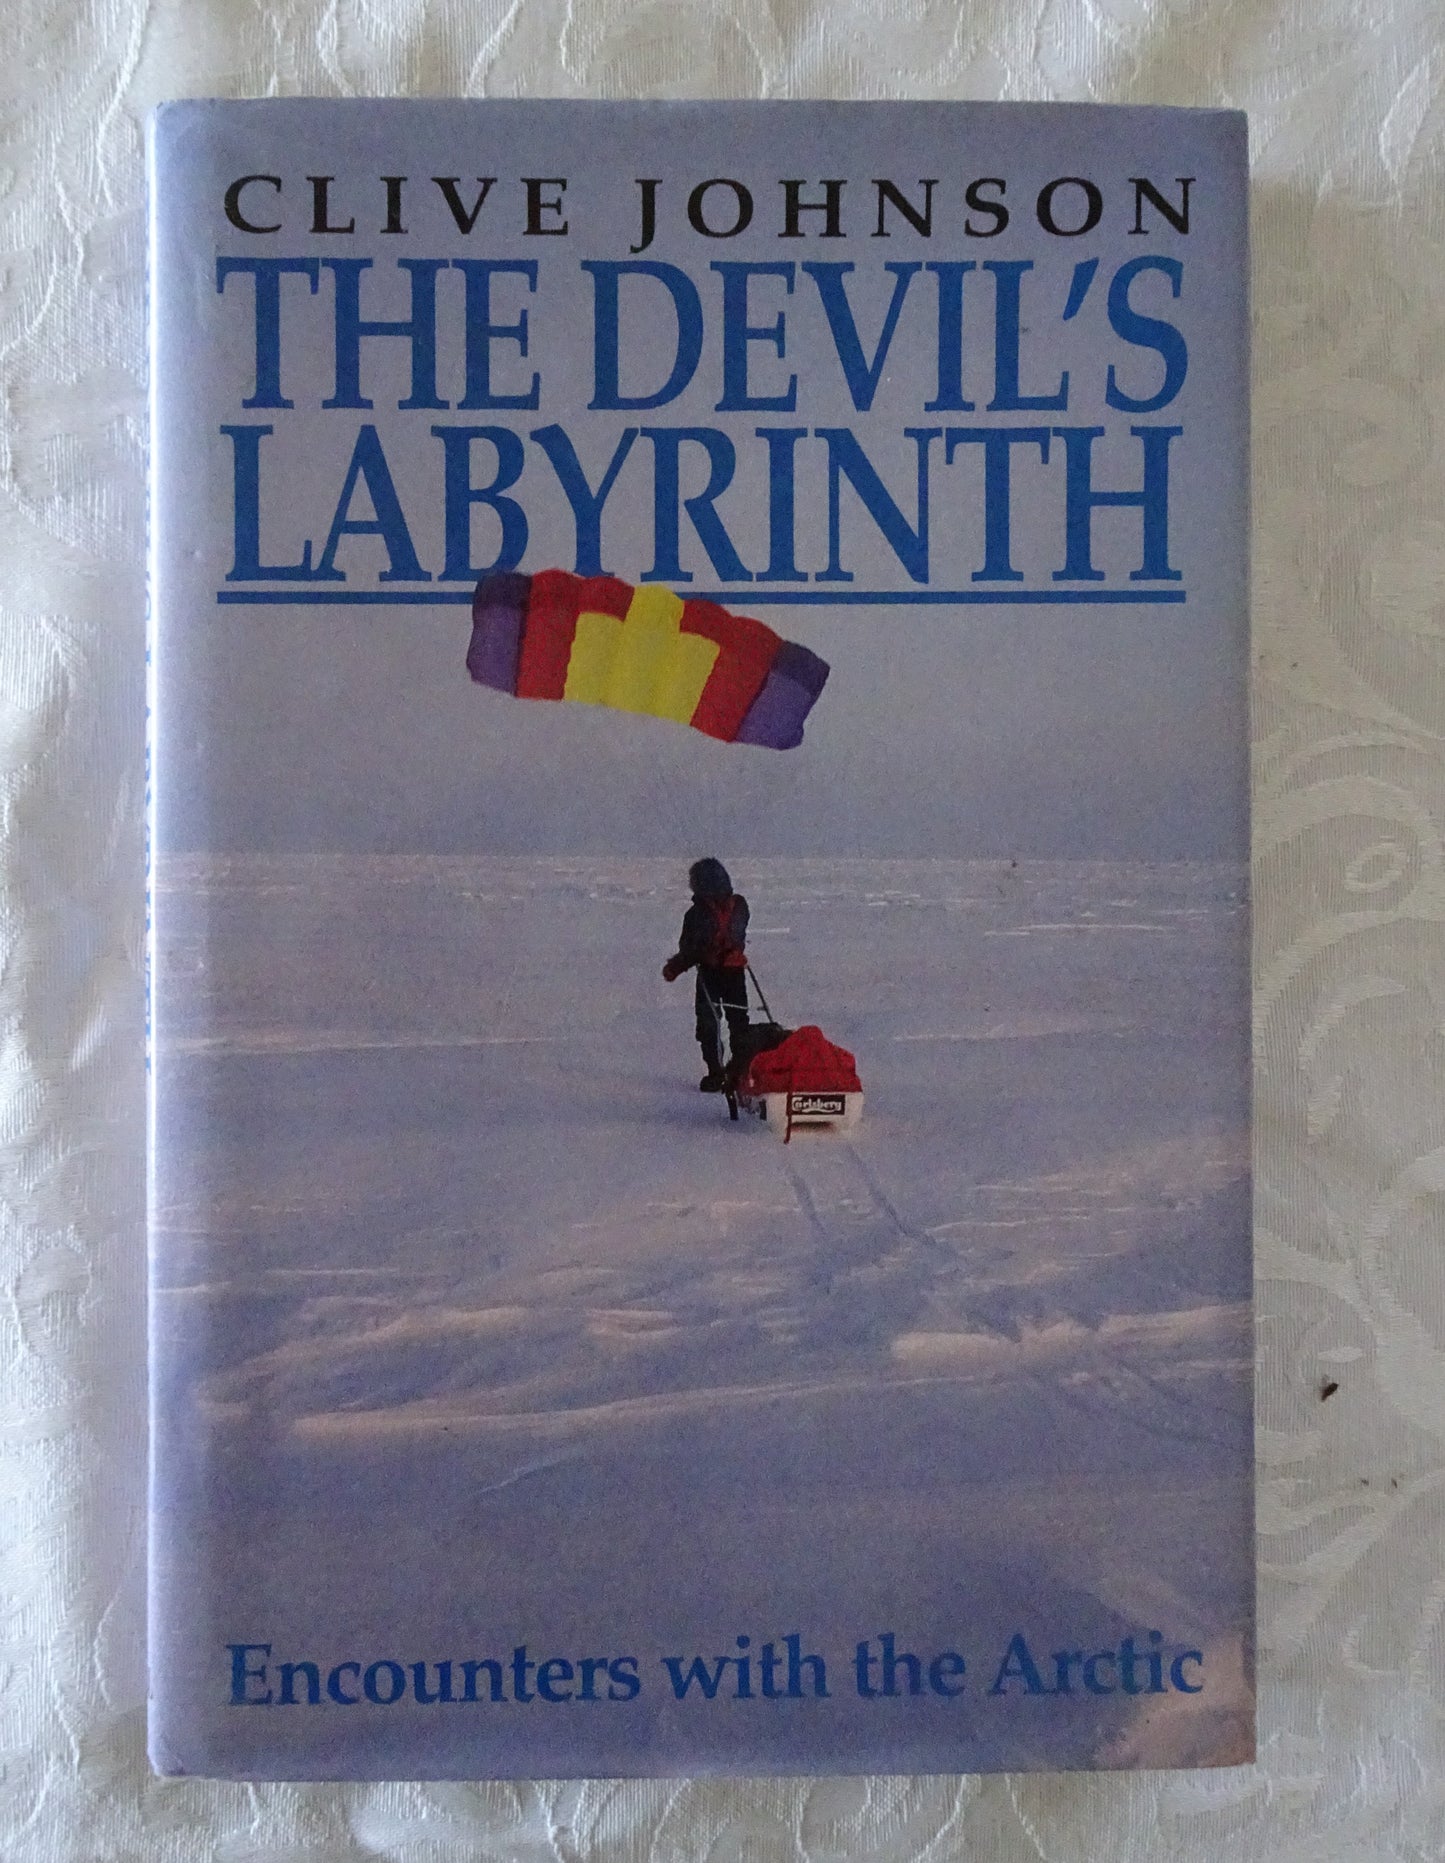 The Devil's Labyrinth by Clive Johnson